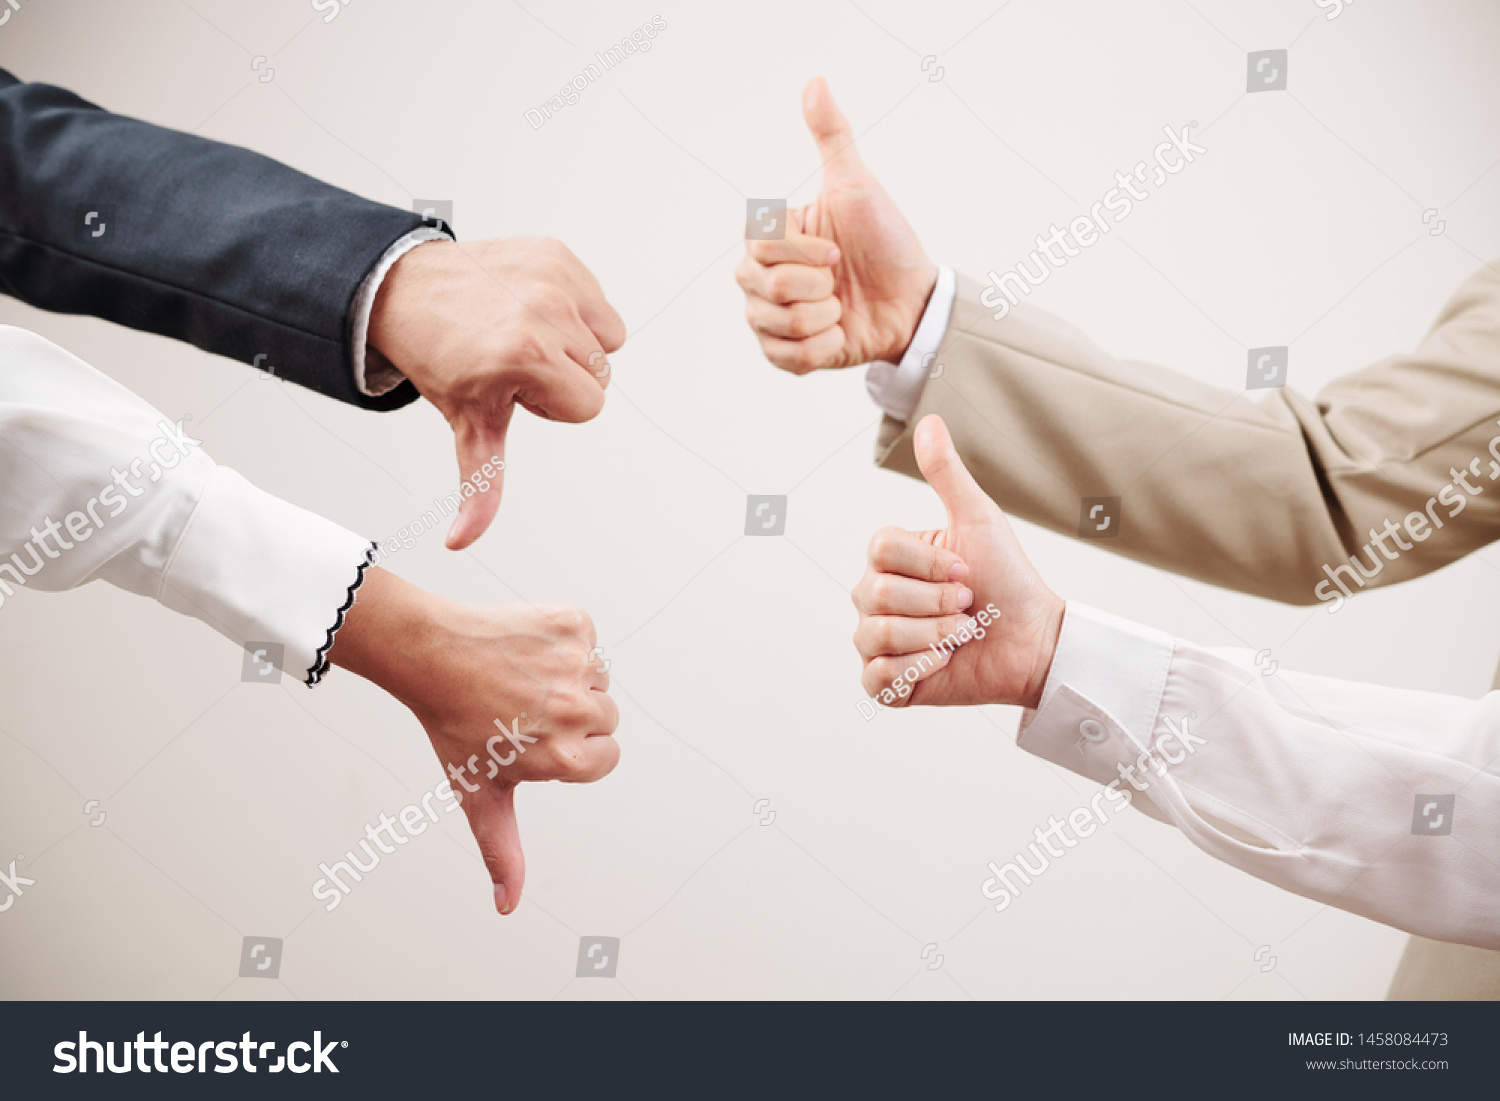 Group of two business partners showing thumb up and other two partners showing failure in business isolated on white background #1458084473